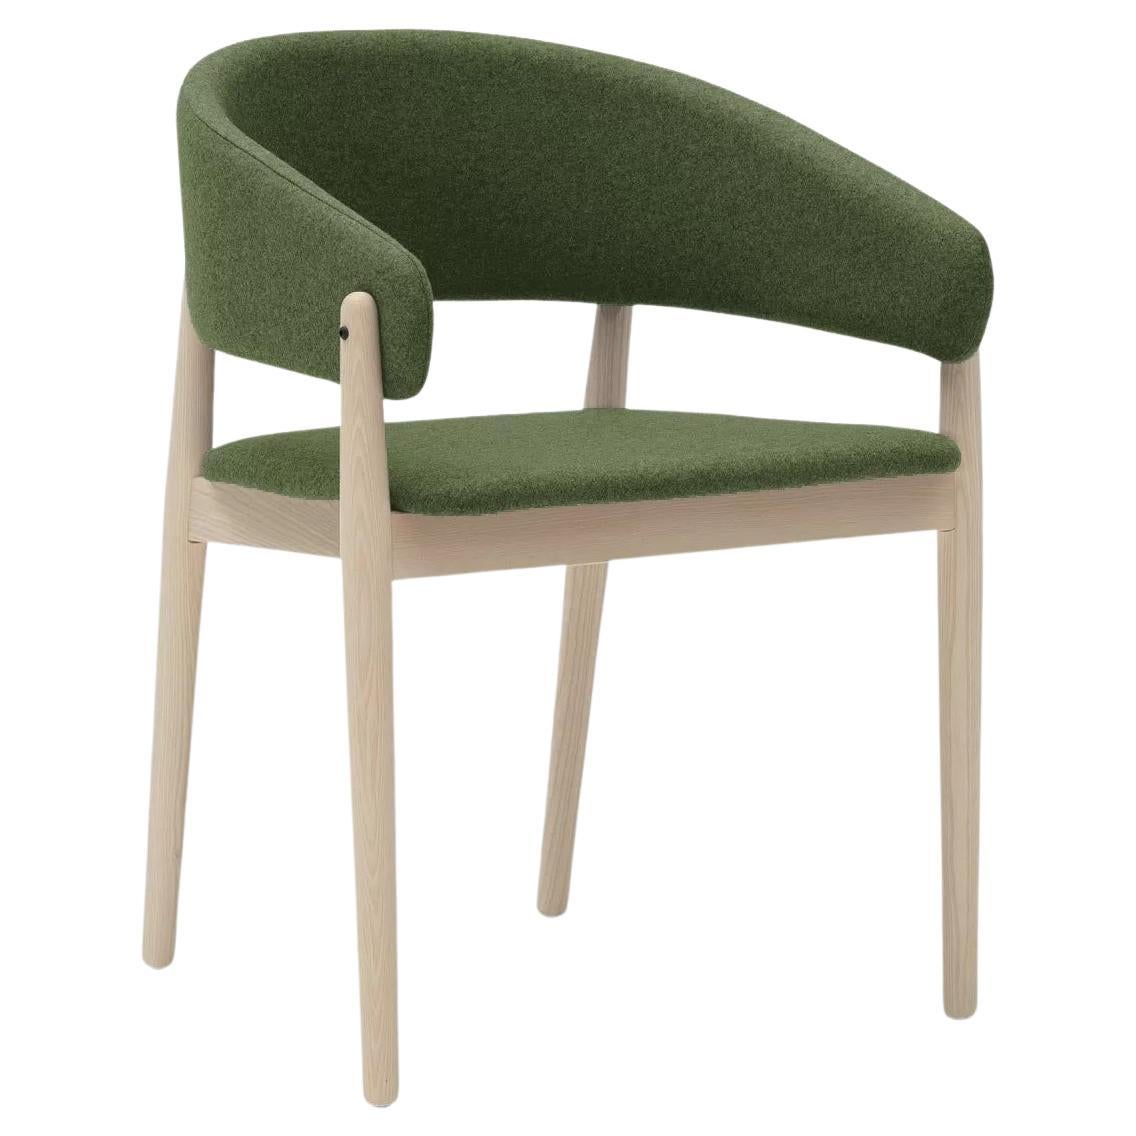 A large arched wrap-around backrest is the element from which this design is visually articulated. This is supported at four points, by blunt wooden bars that are lowered to the floor turning into legs.
A warm contrast is established between the